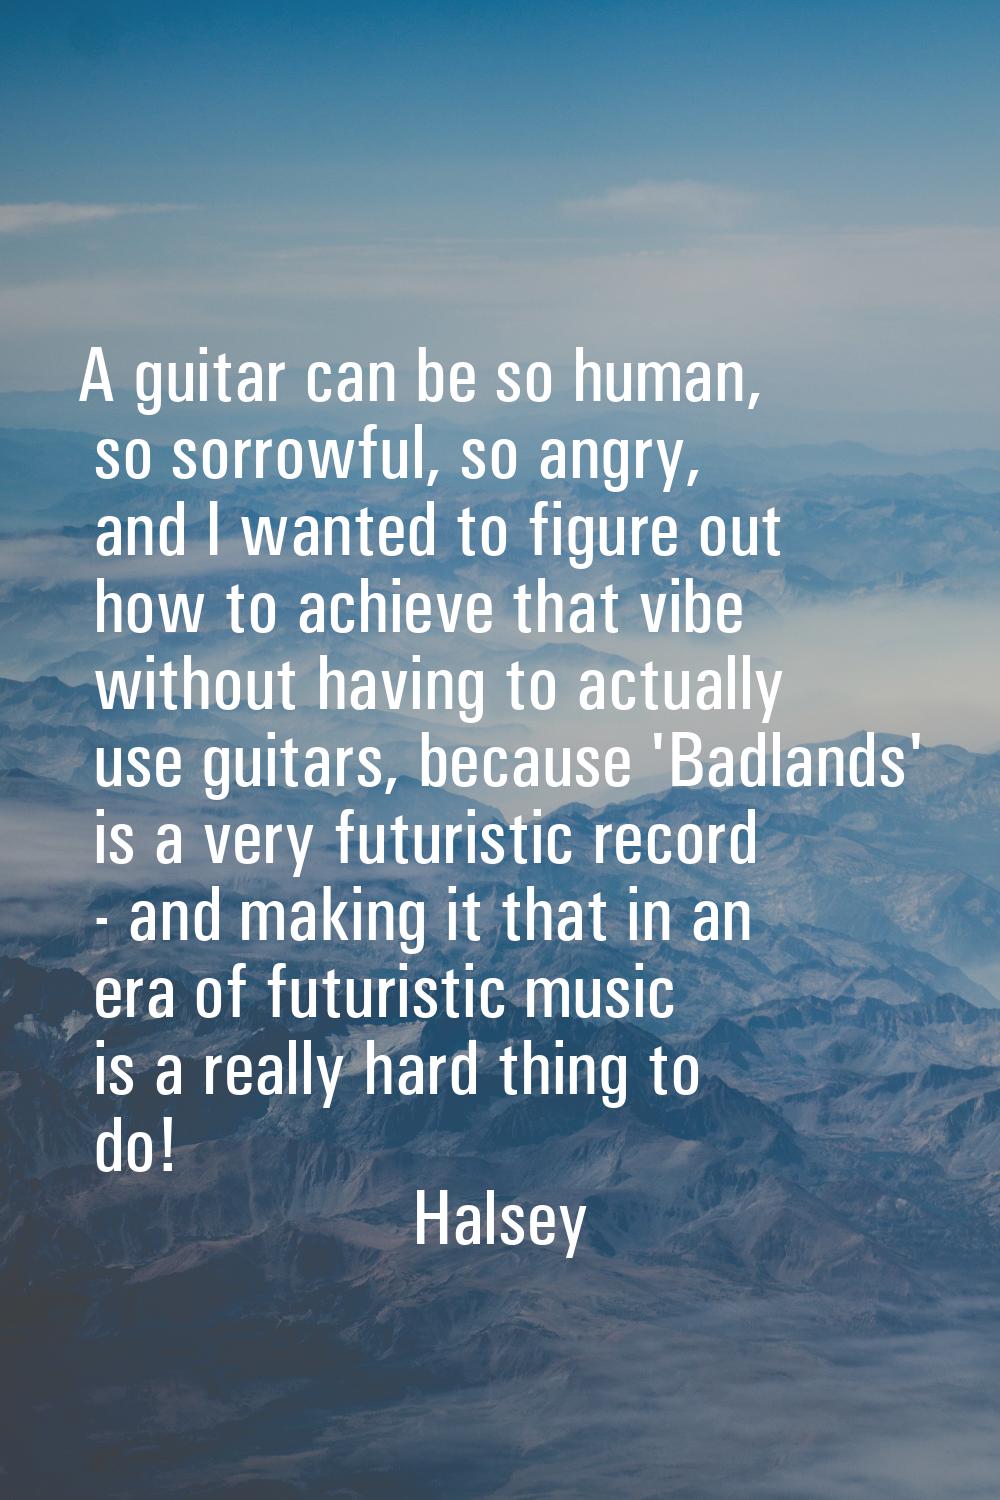 A guitar can be so human, so sorrowful, so angry, and I wanted to figure out how to achieve that vi